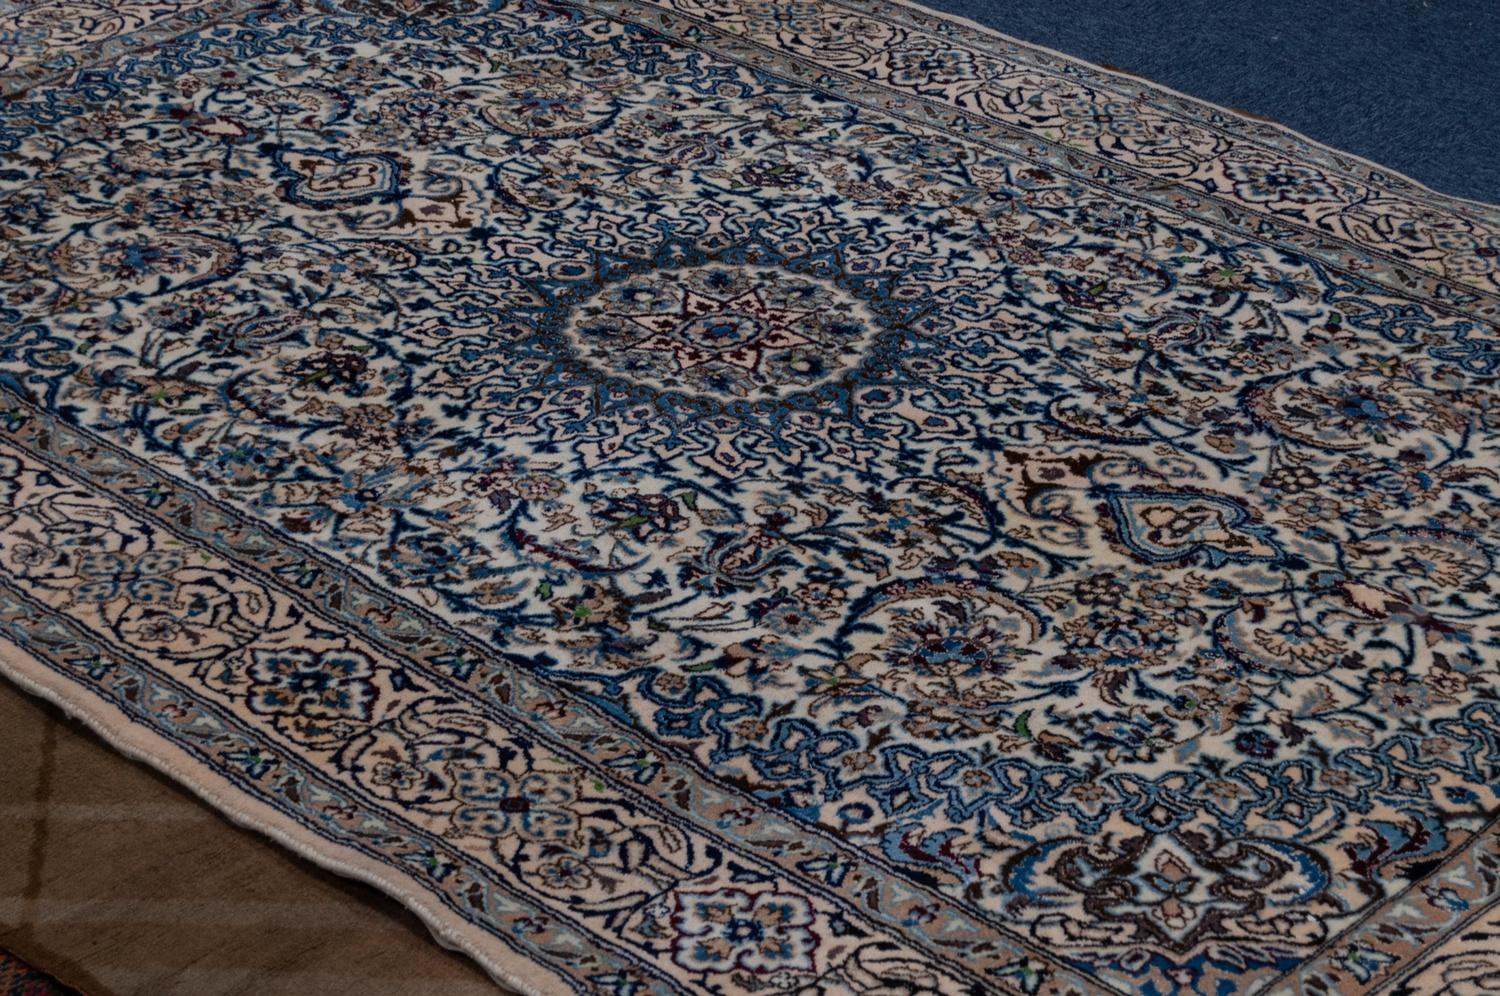 GOREVAN, PERSIAN CARPET with circular concentric medallions with long pendants, on a white field - Image 2 of 2